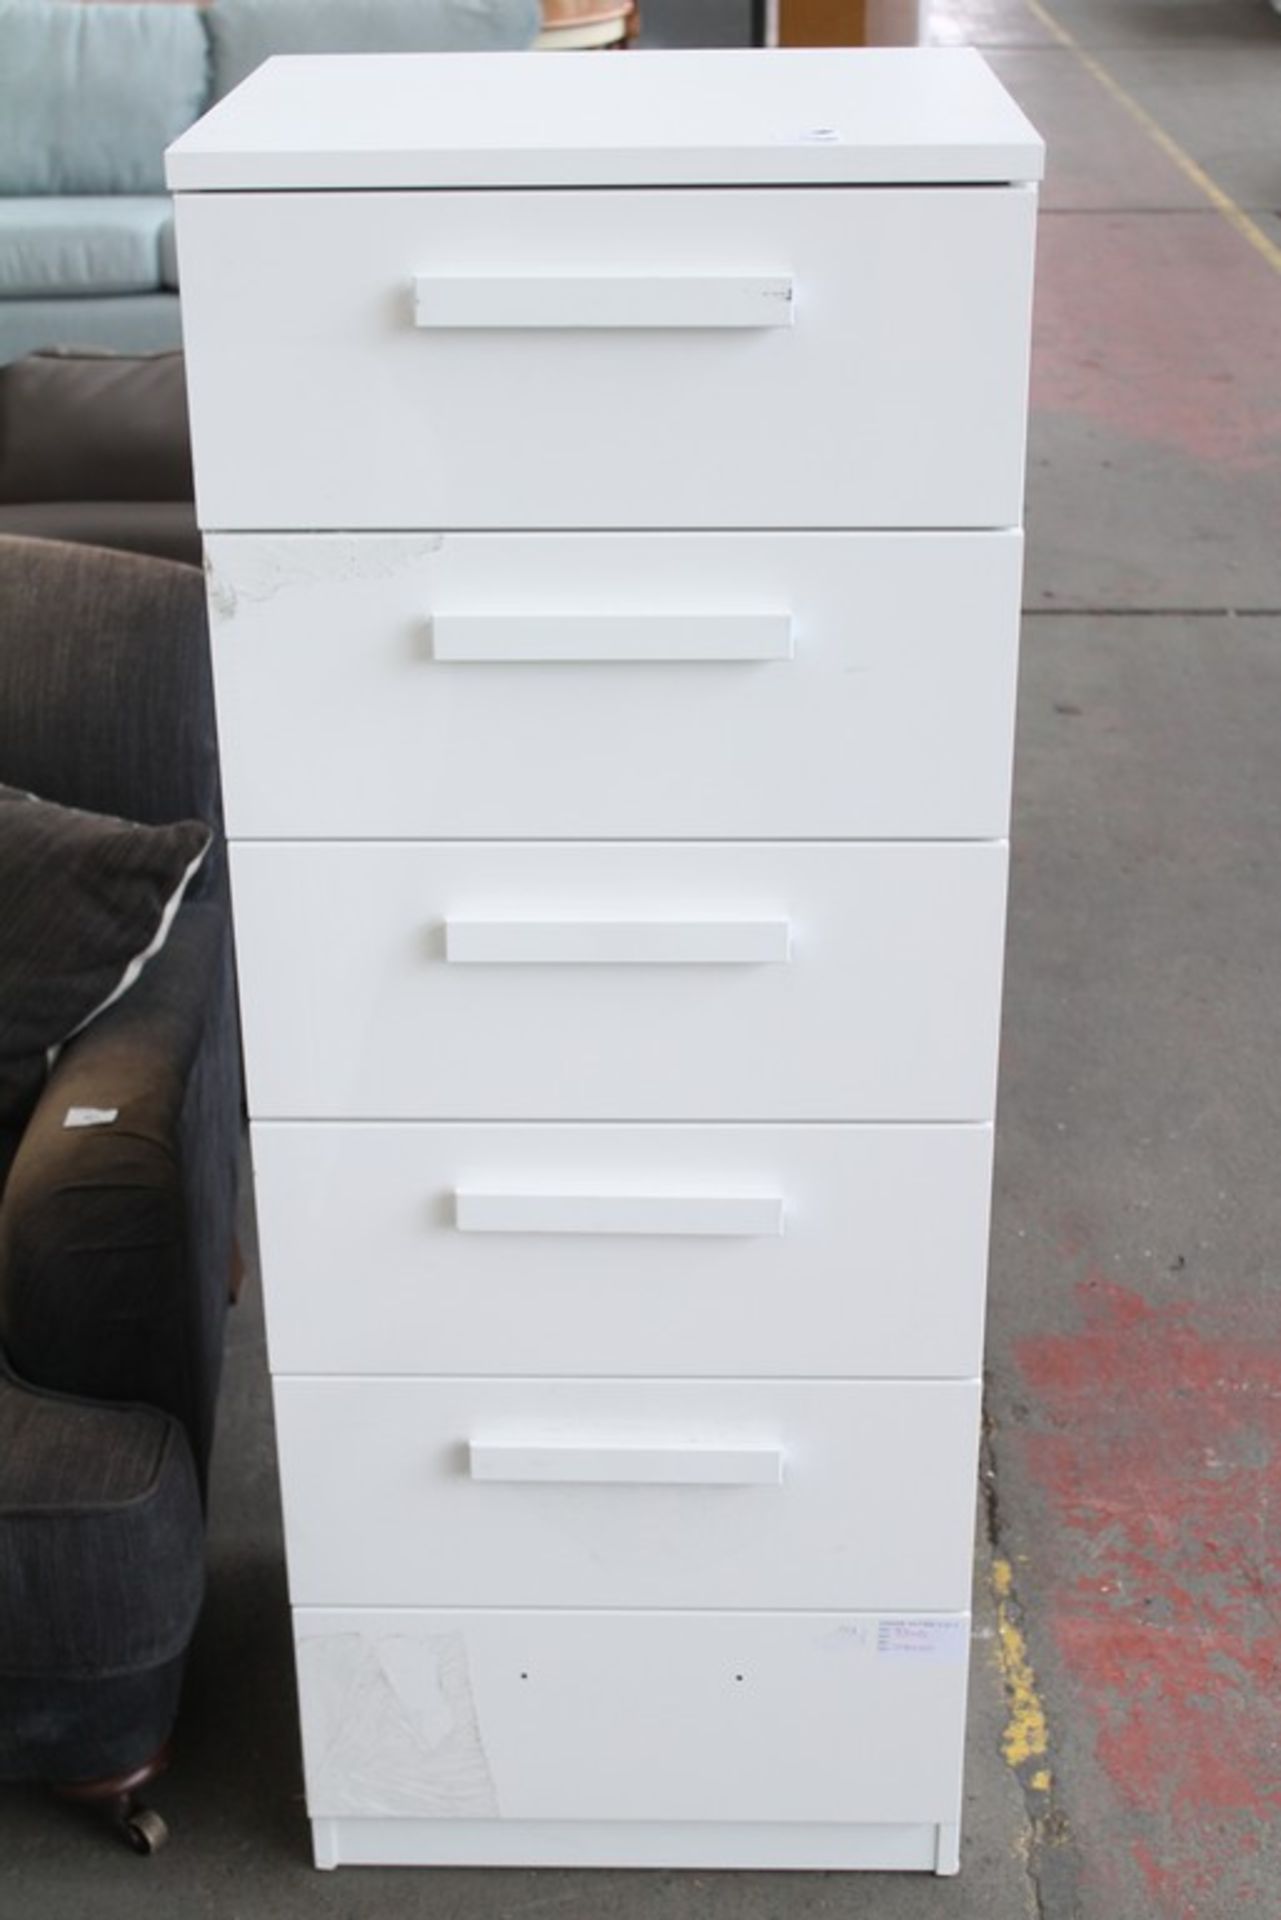 1 x HIGH GLOSS WHITE 6 DRAWER CHEST OF DRAWERS RRP £400 (9340)(10.4.15)  *PLEASE NOTE THAT THE BID